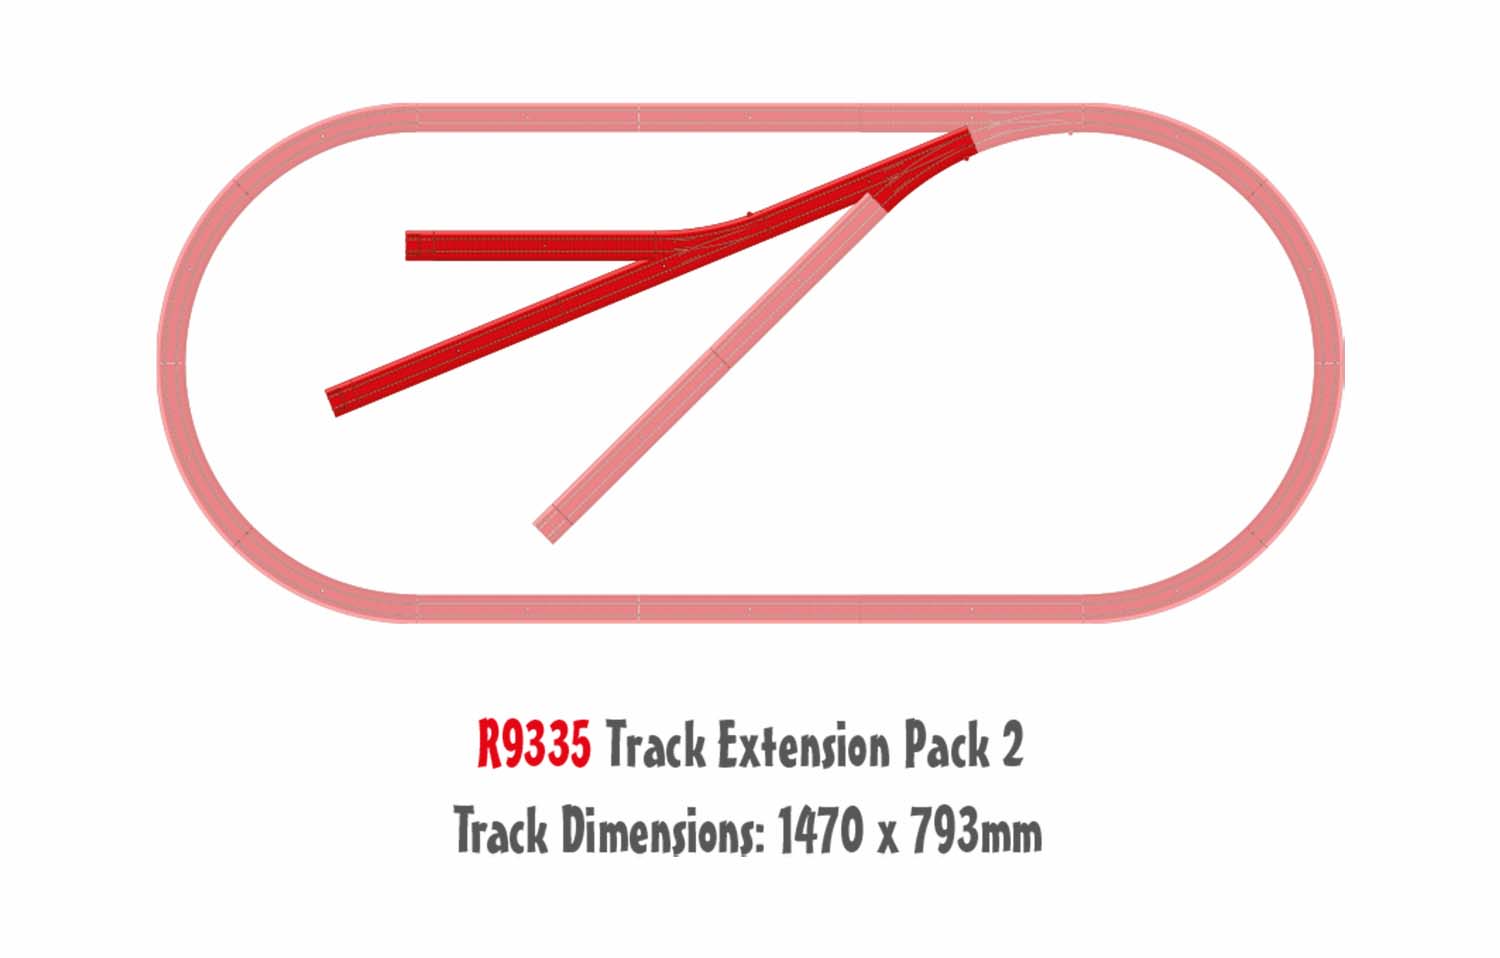 Playtrains Track Extension Pack 2 R9335